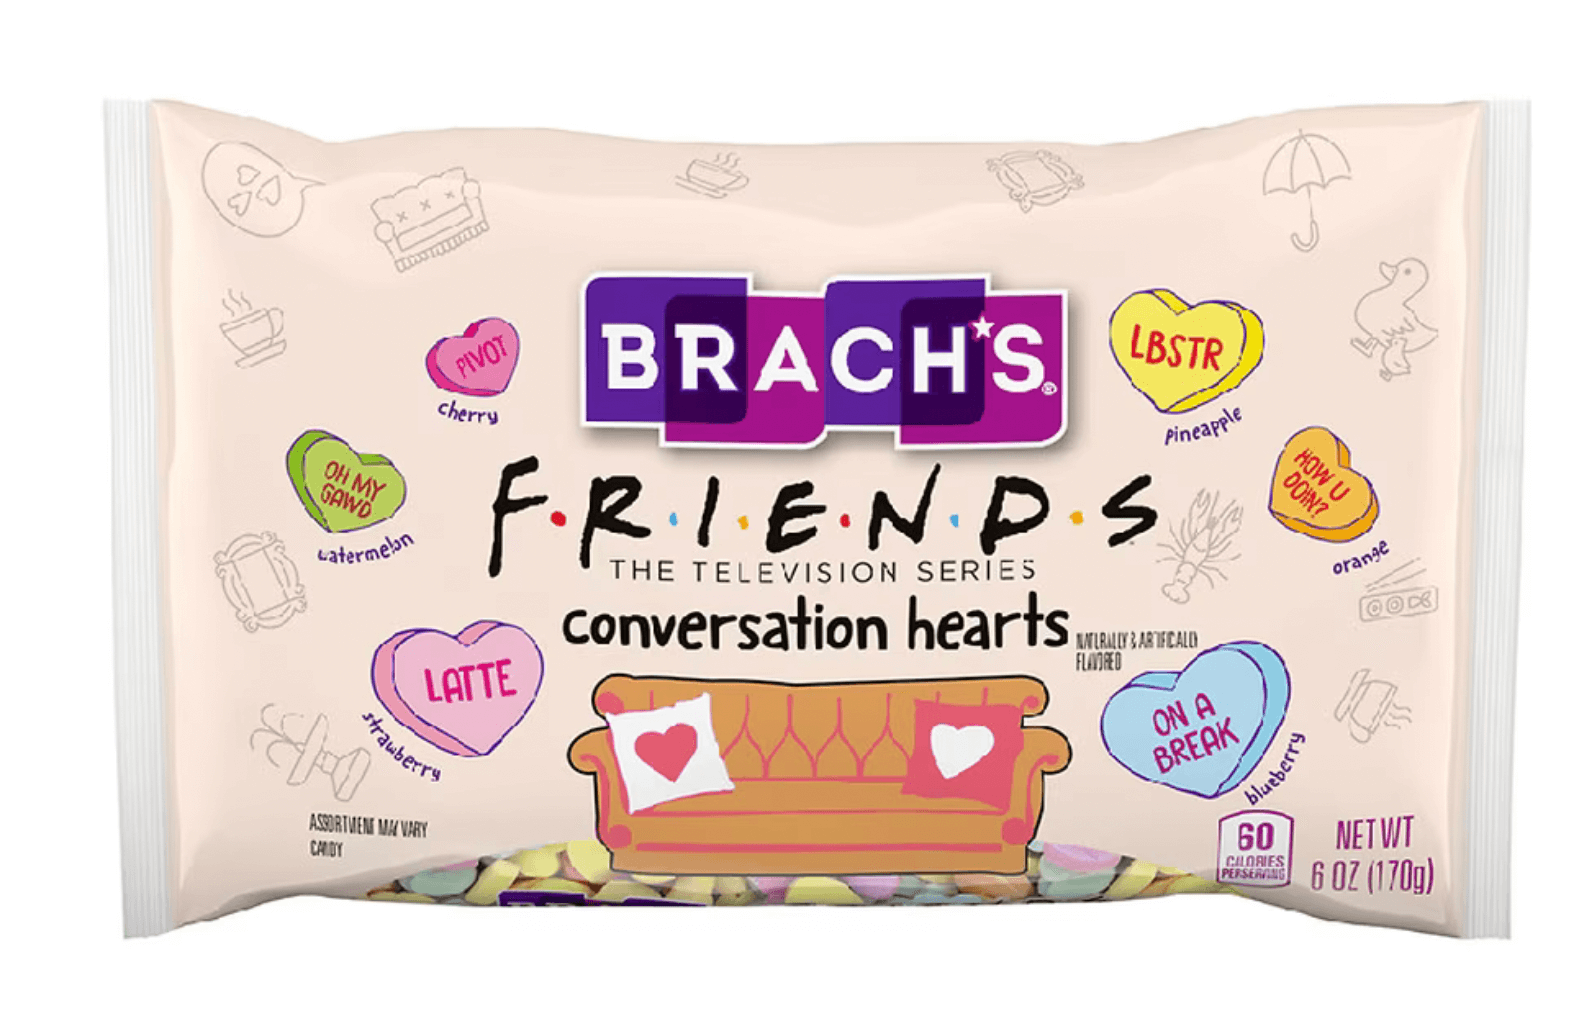 Brach’s candy hearts in collaboration with Friends TV series